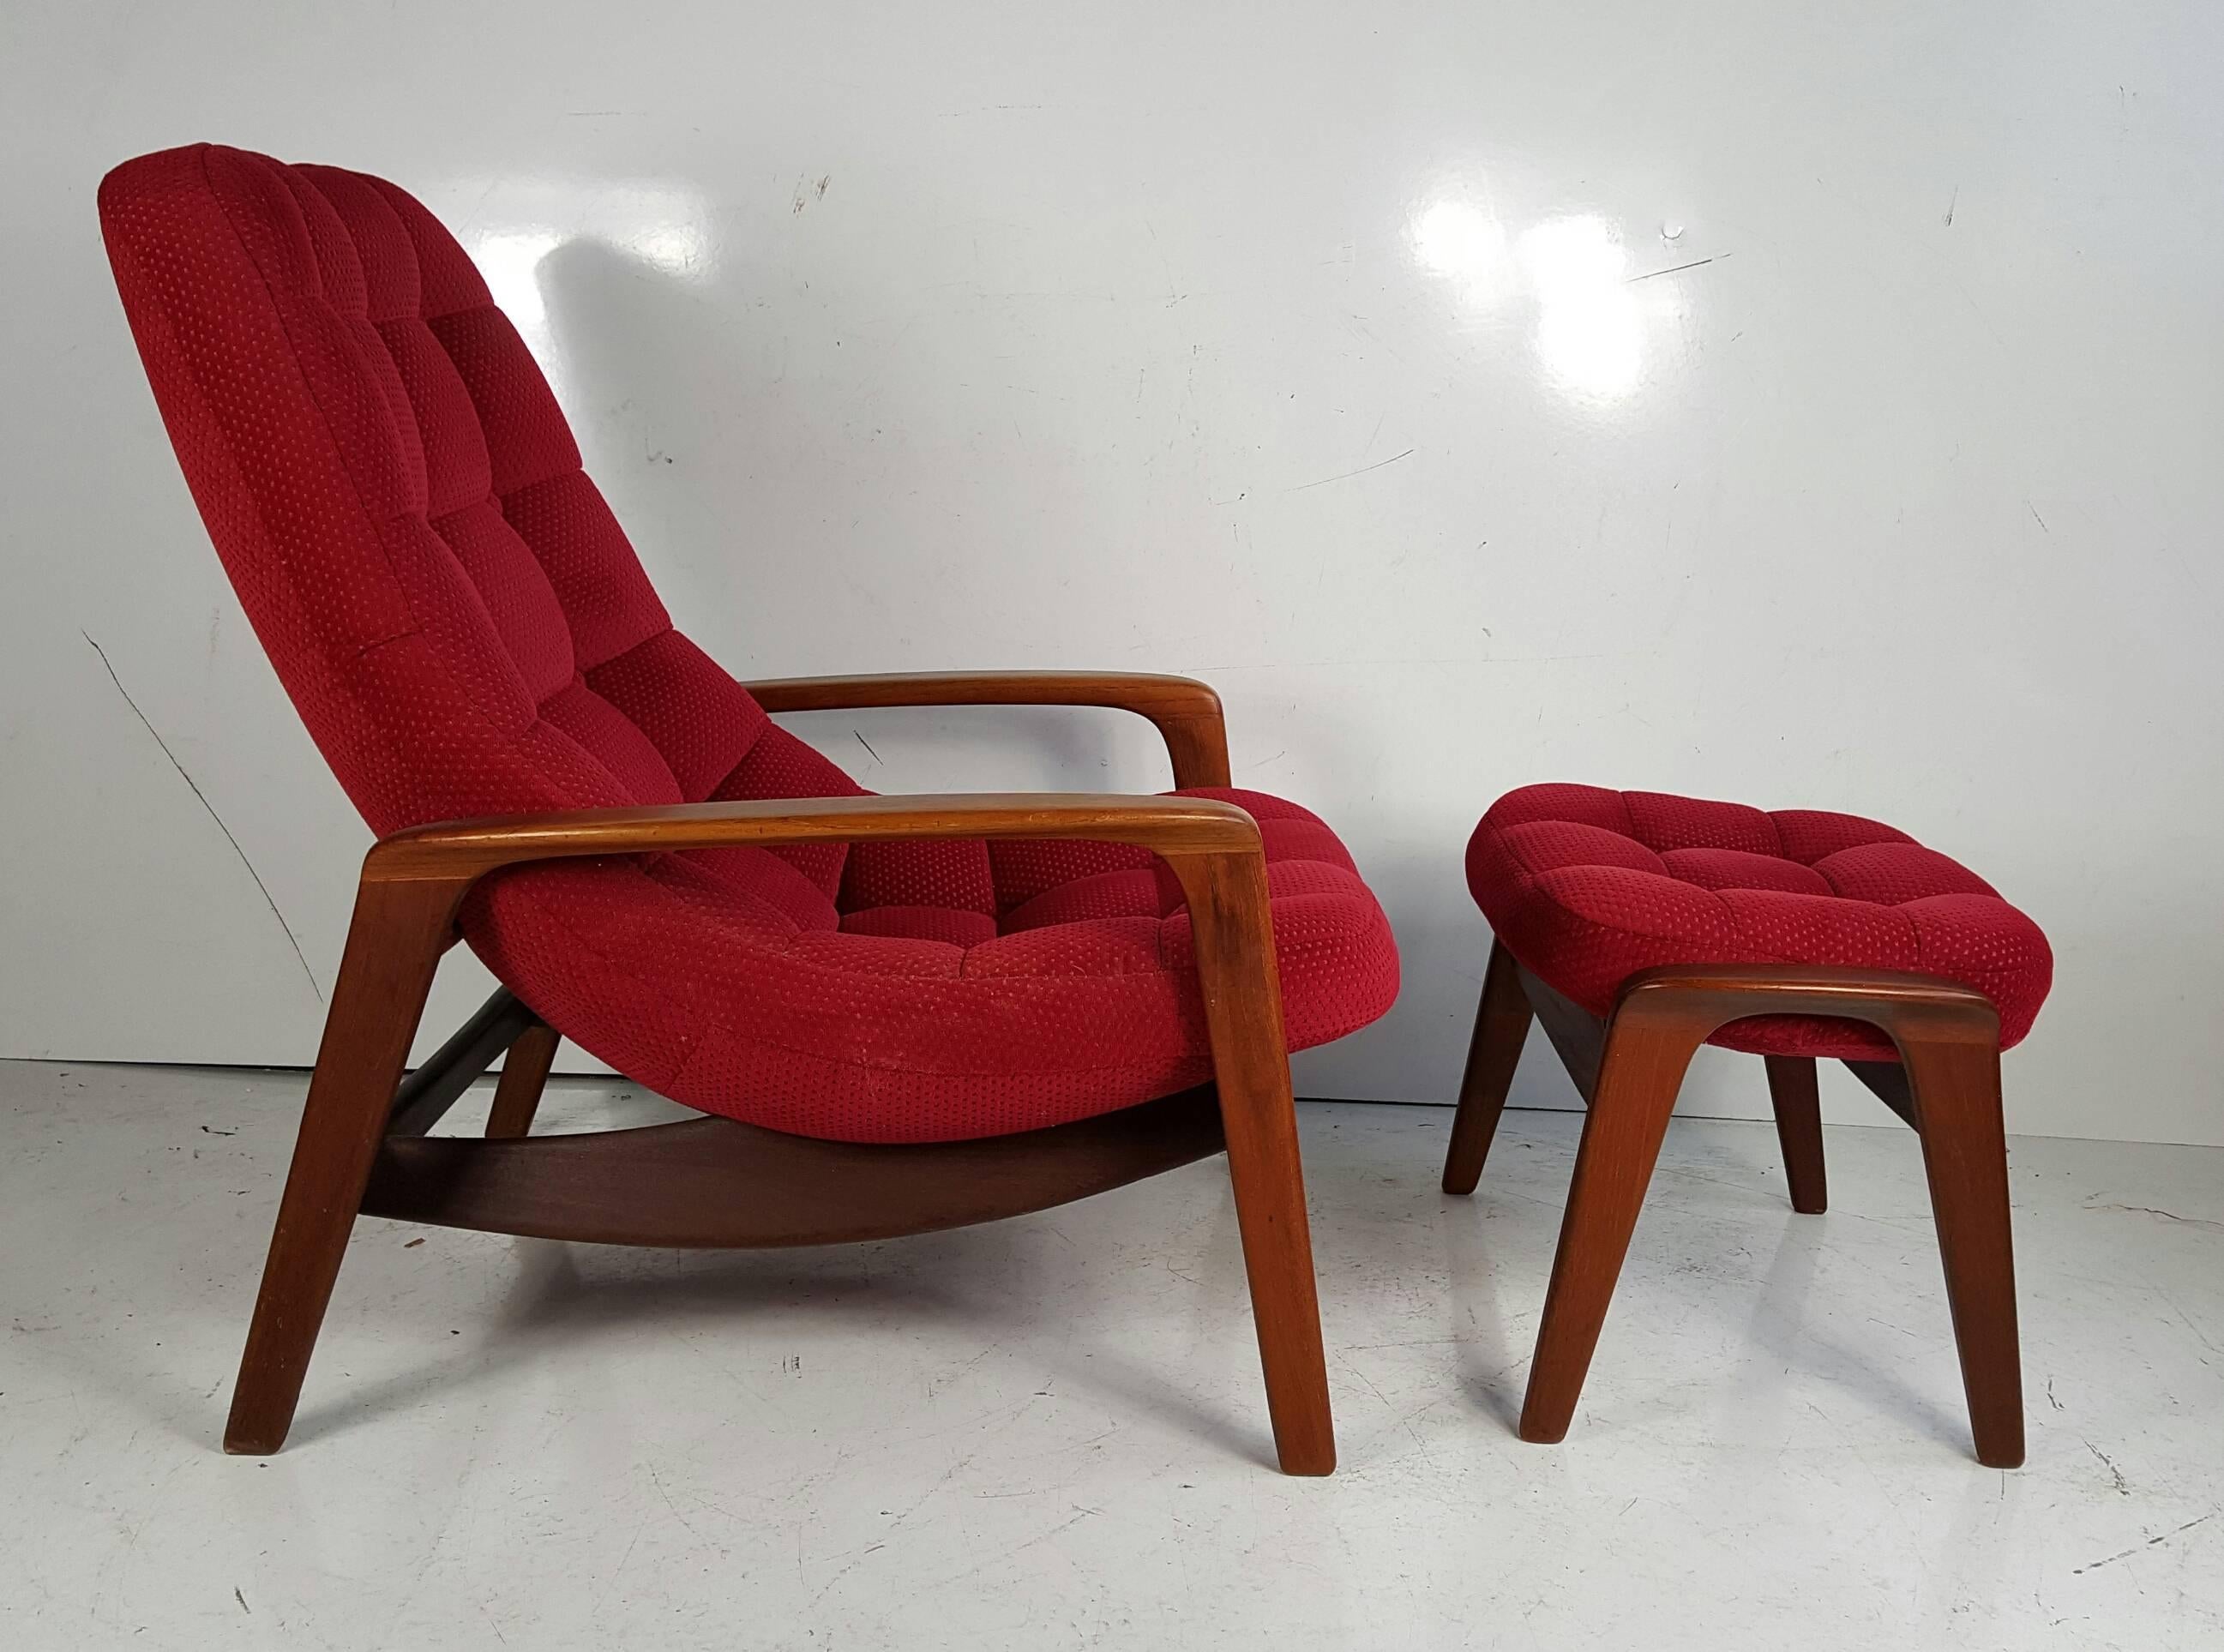  Heavy and well made teak lounge chair, designed by R. Huber and manufactured in Canada. It features a sculpted upholstered fiberglass seat with a solid teak frame.Classic Mid Century Modern design..